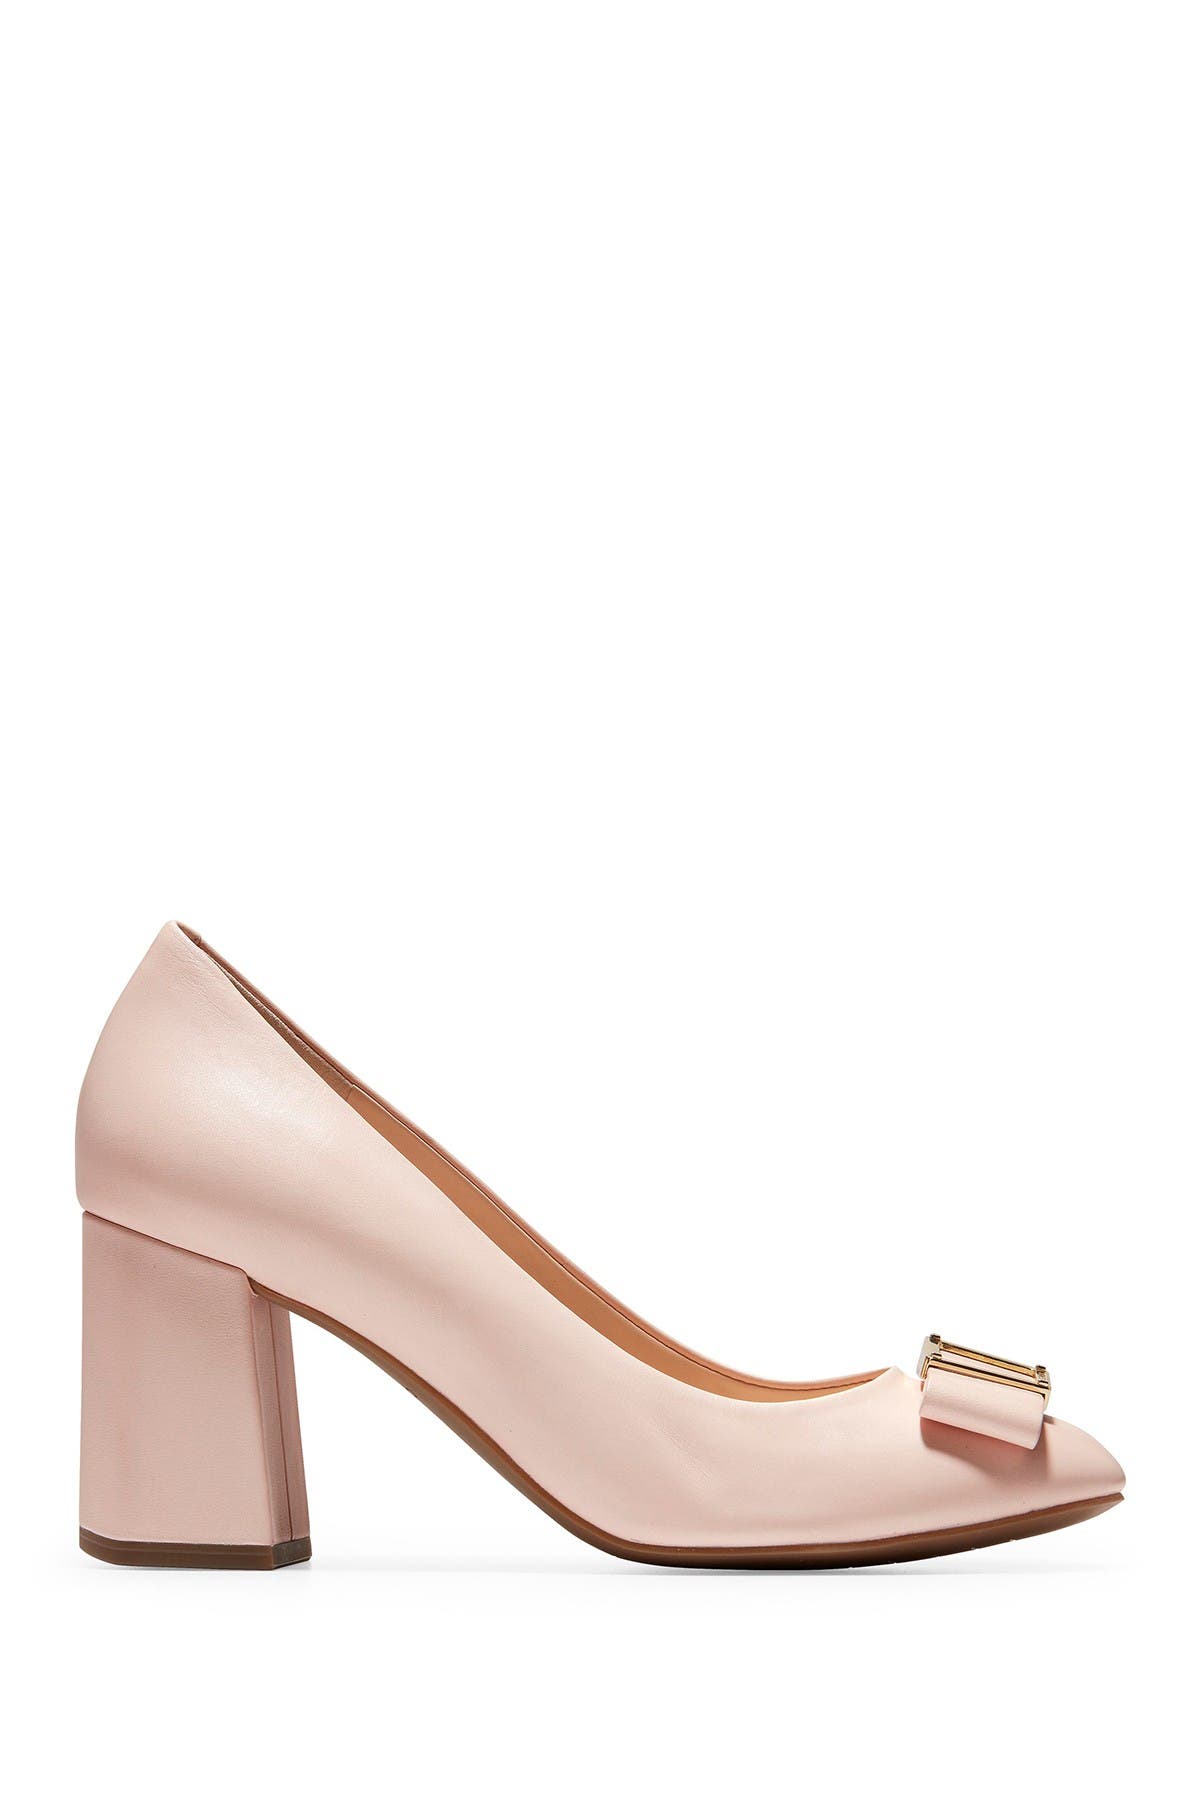 Cole Haan | Emory Grand Bow Pump 